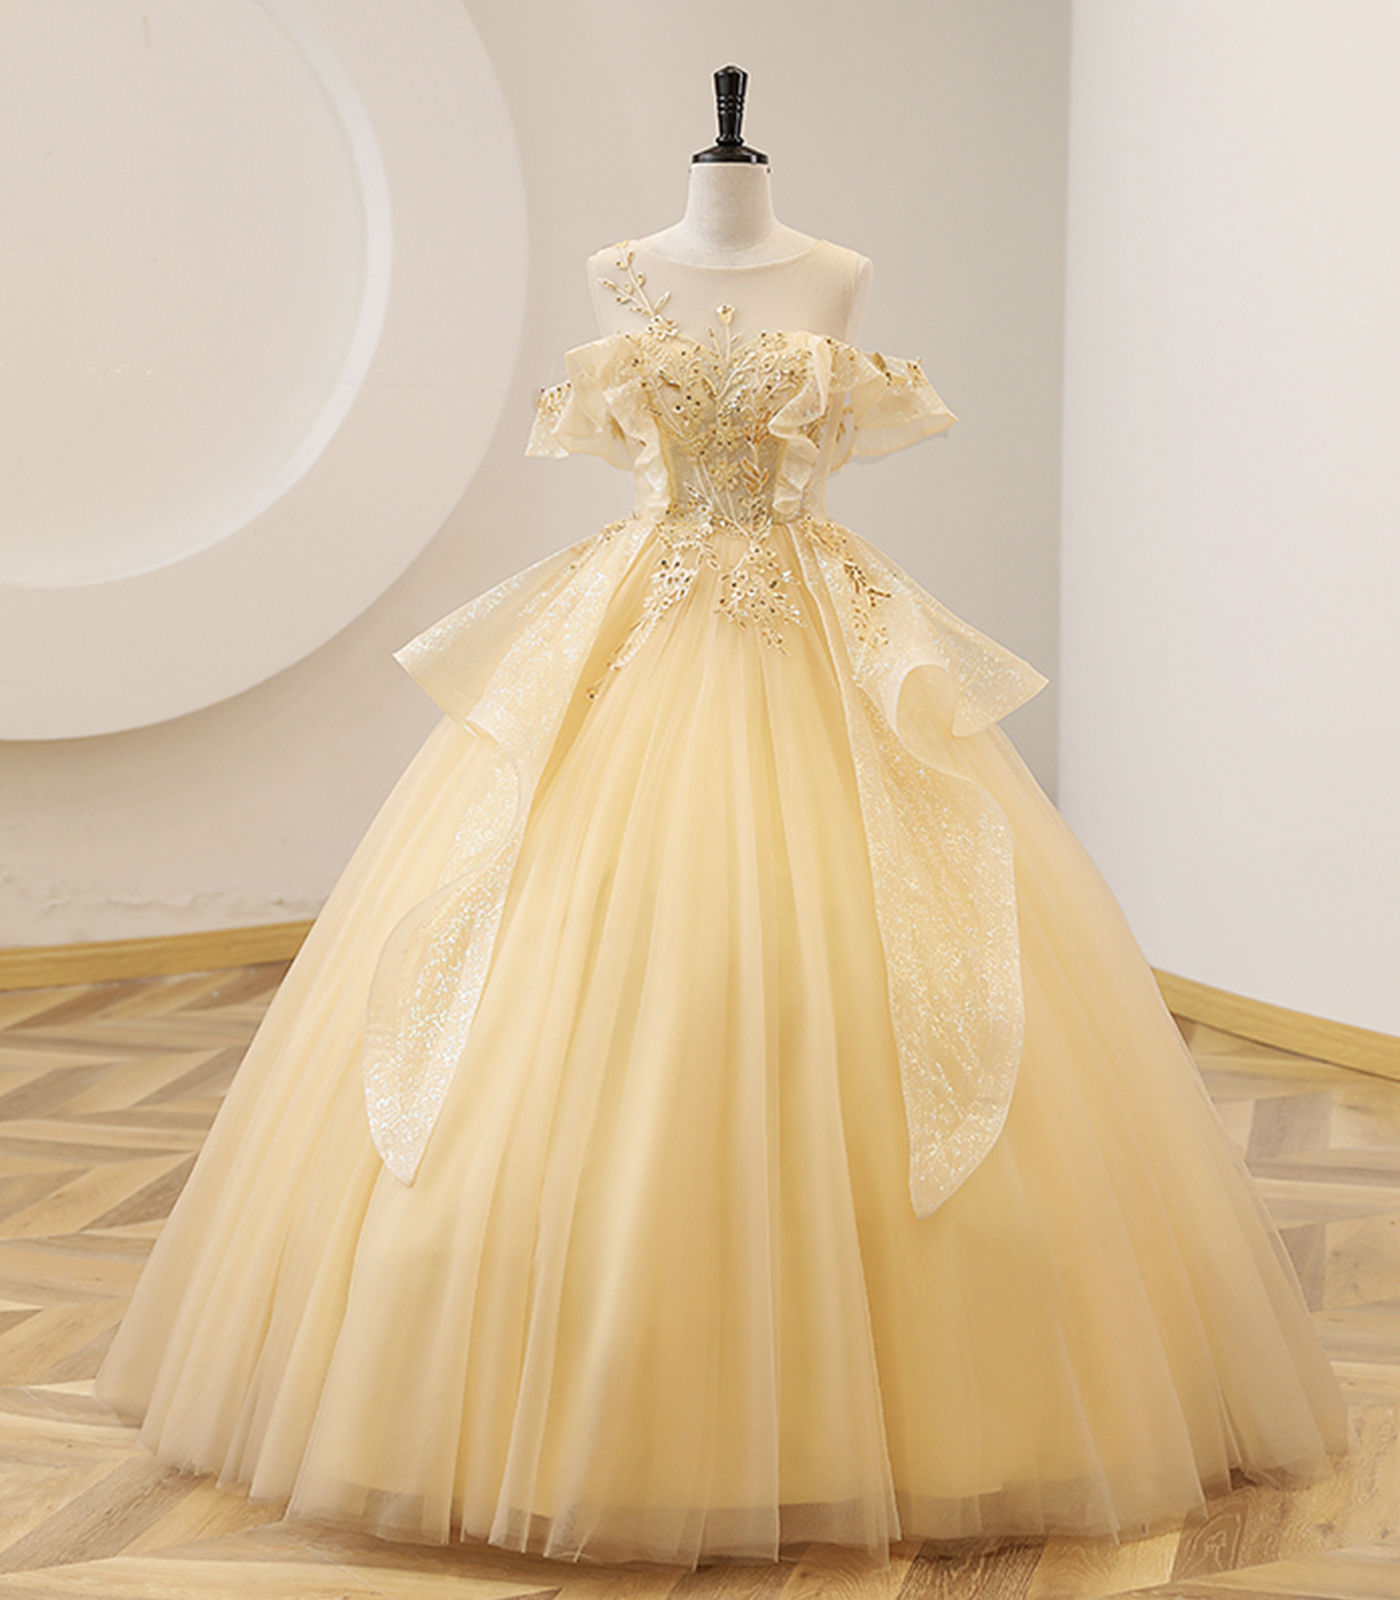 Shop Beautiful Yellow Puffy Prom Dress 3D Flowers Feathers Tiered Tulle  Plus Size Ball Gown Formal Evening Dresses under 300